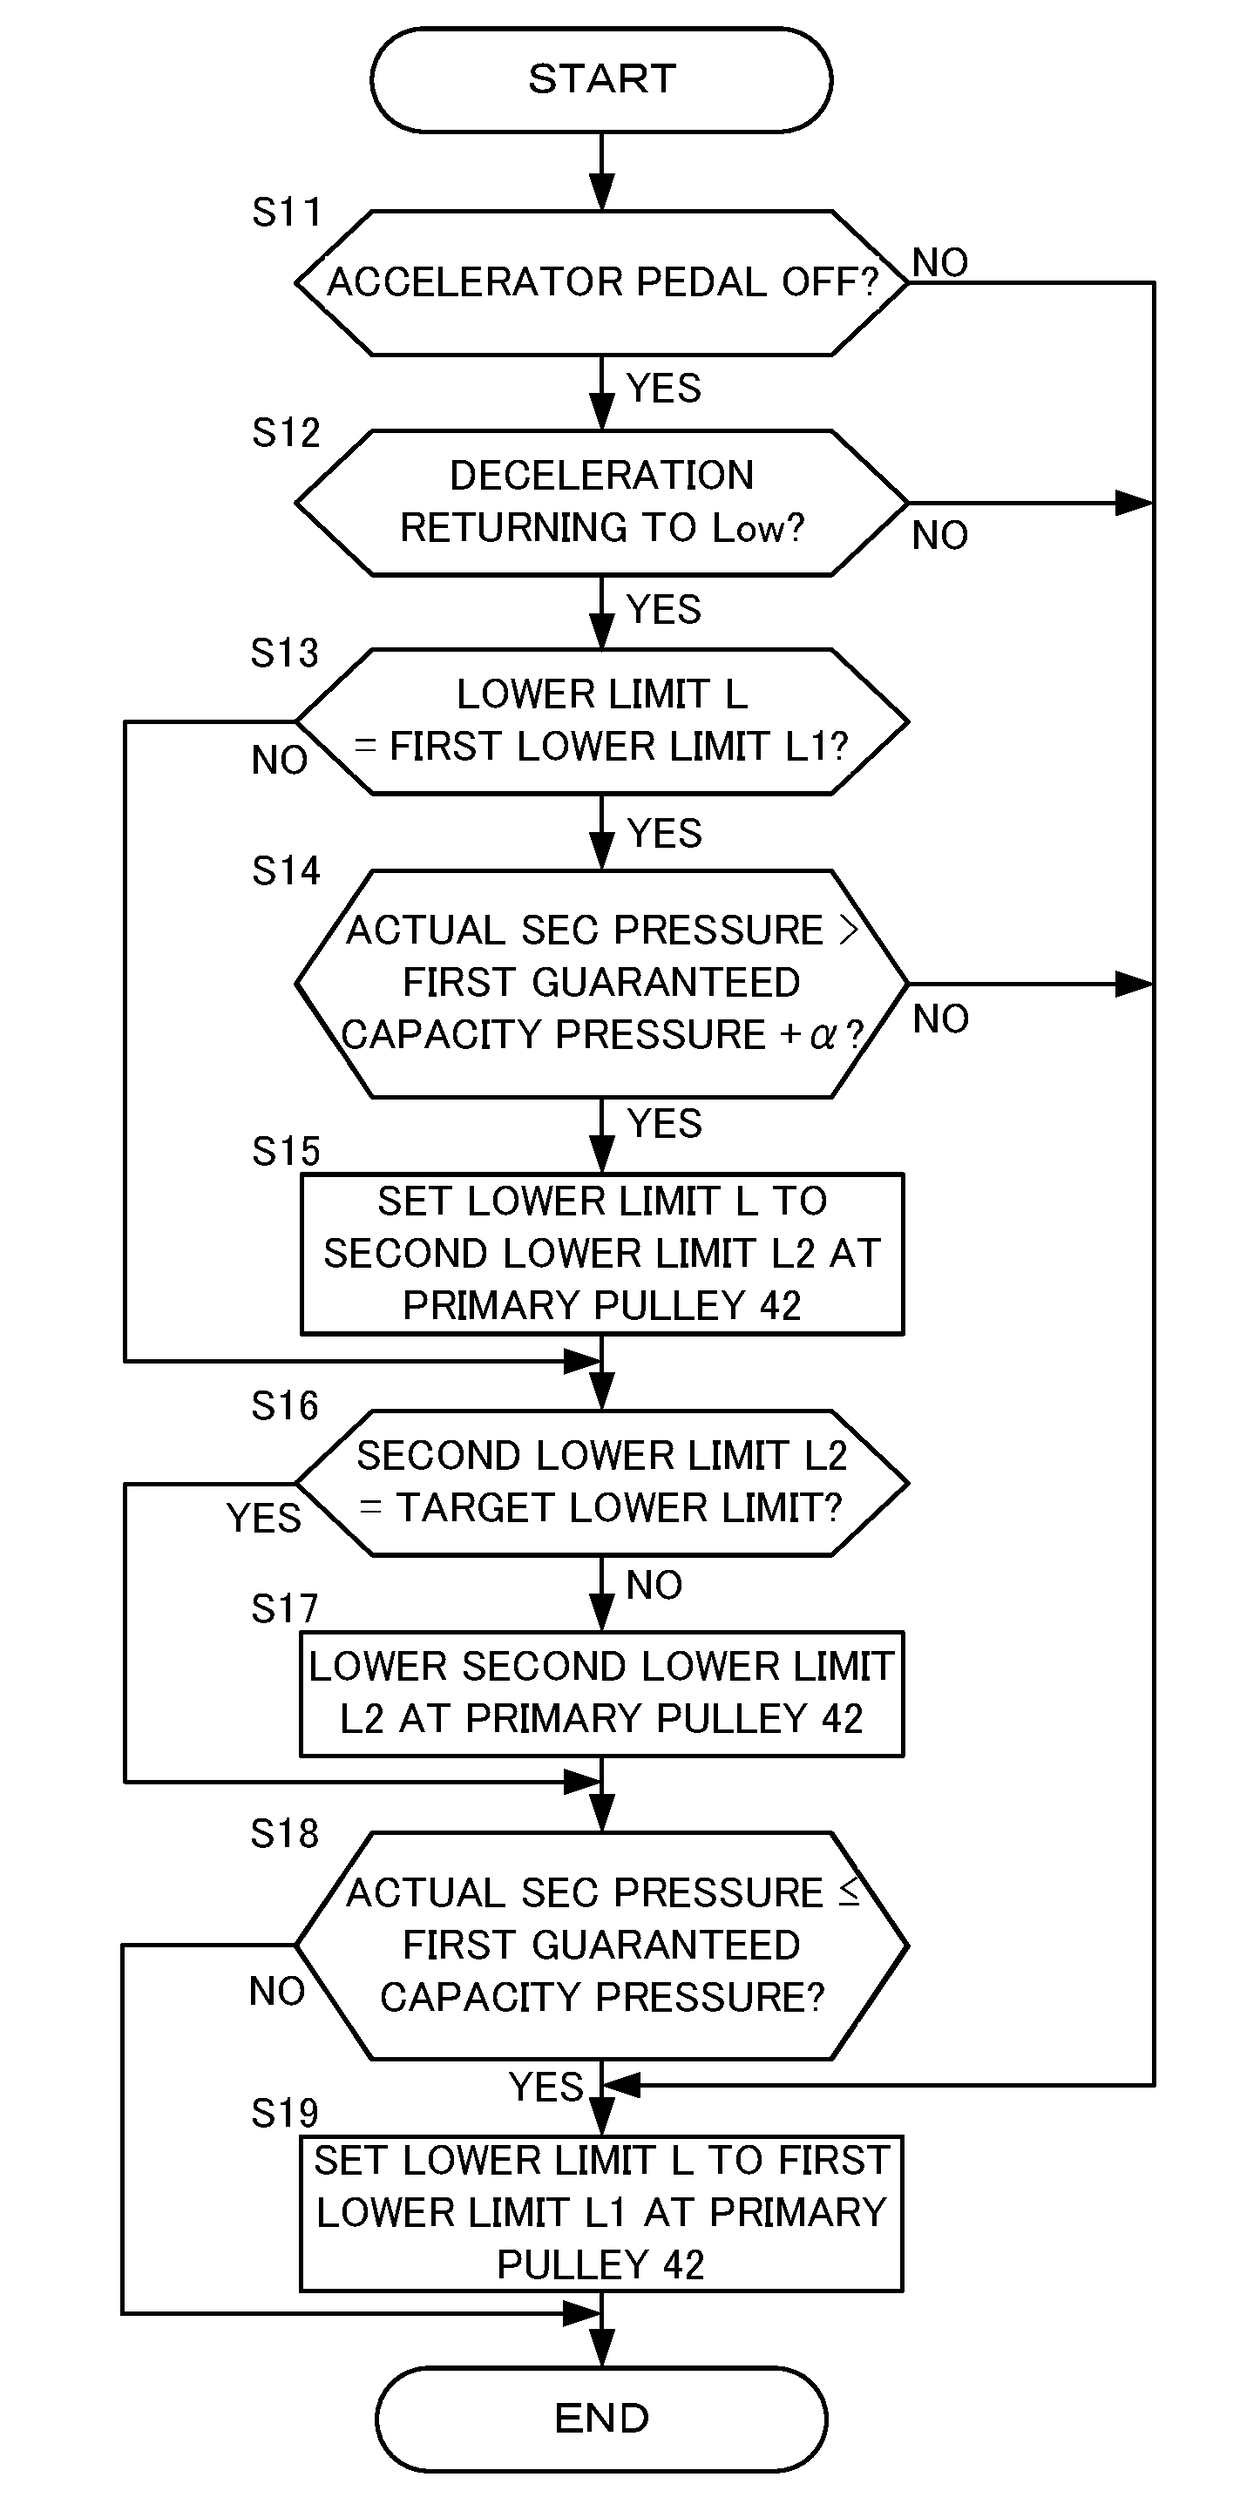 Vehicle and method for controlling the same